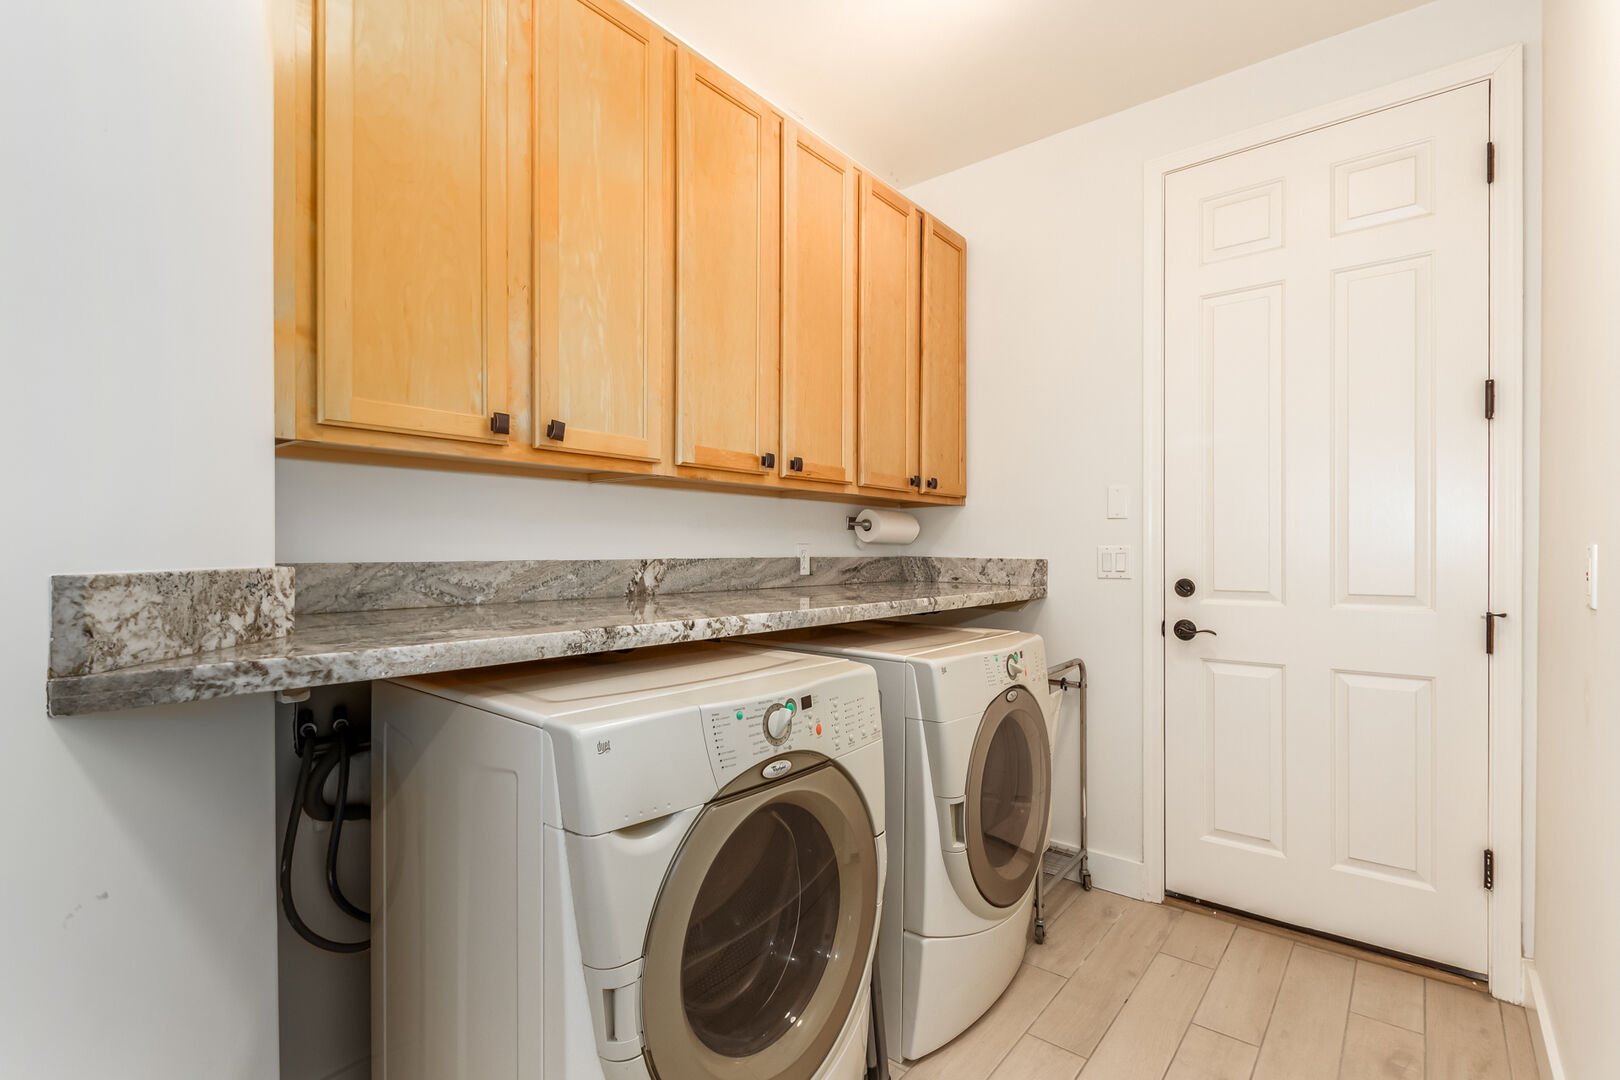 In home Laundry Room featuring Washer and Dryer.